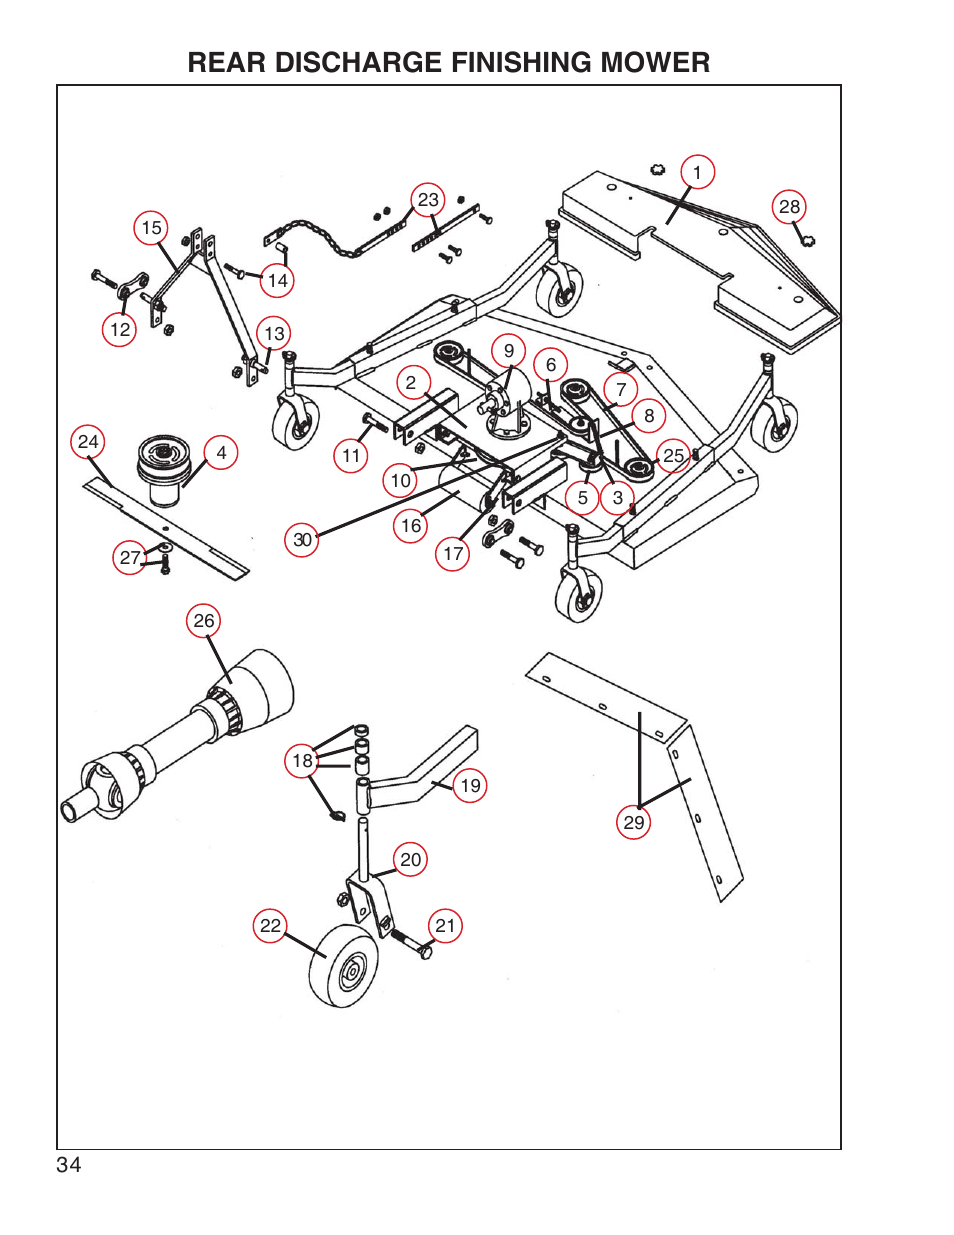 Rear discharge finishing mower | King Kutter Free Floating User Manual | Page 34 / 44